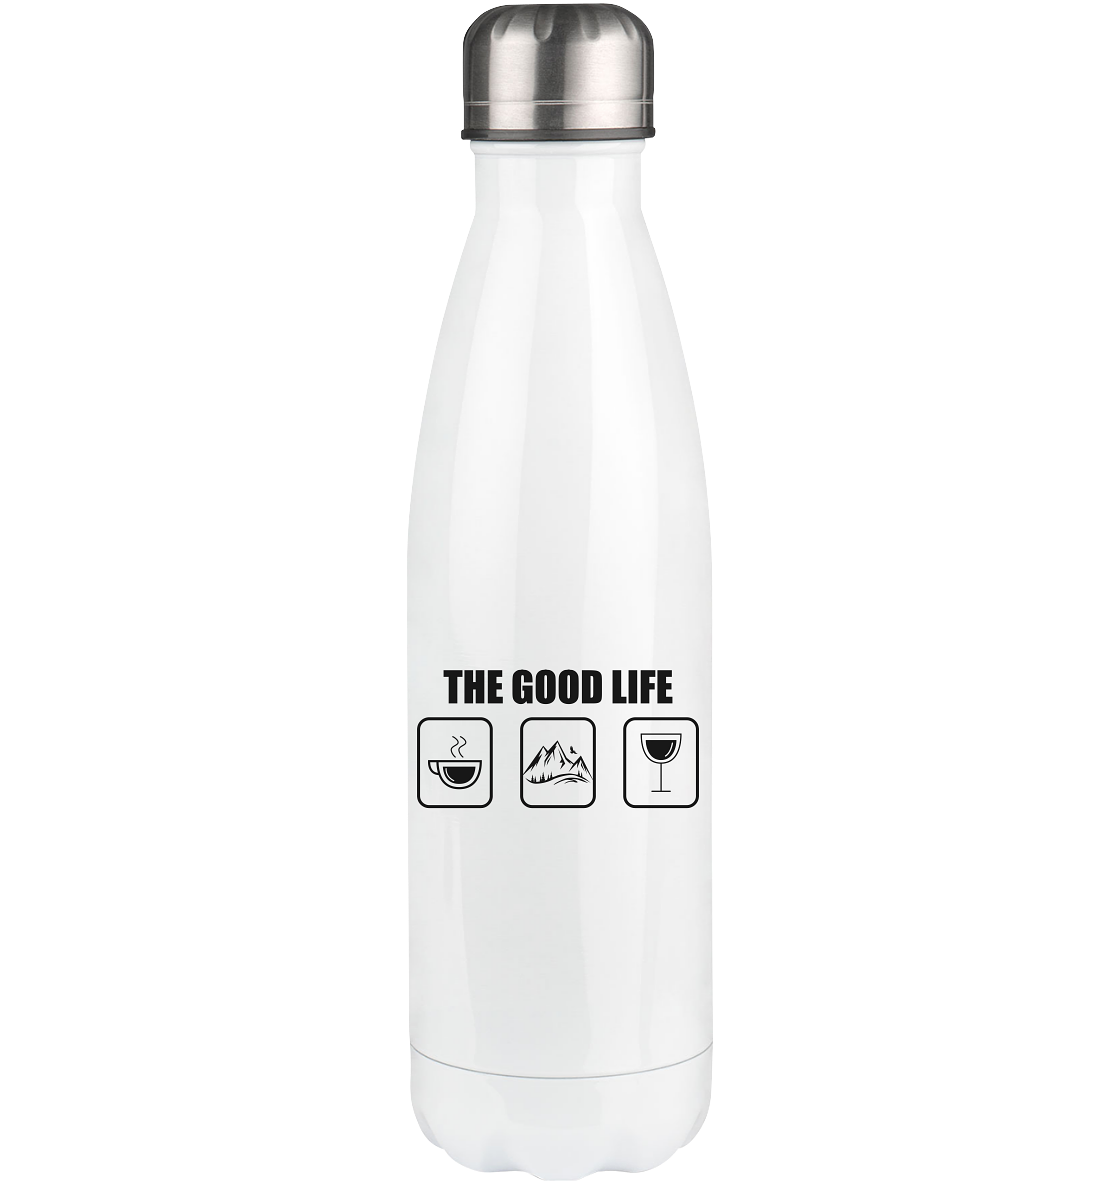 The Good Life - Edelstahl Thermosflasche berge 500ml